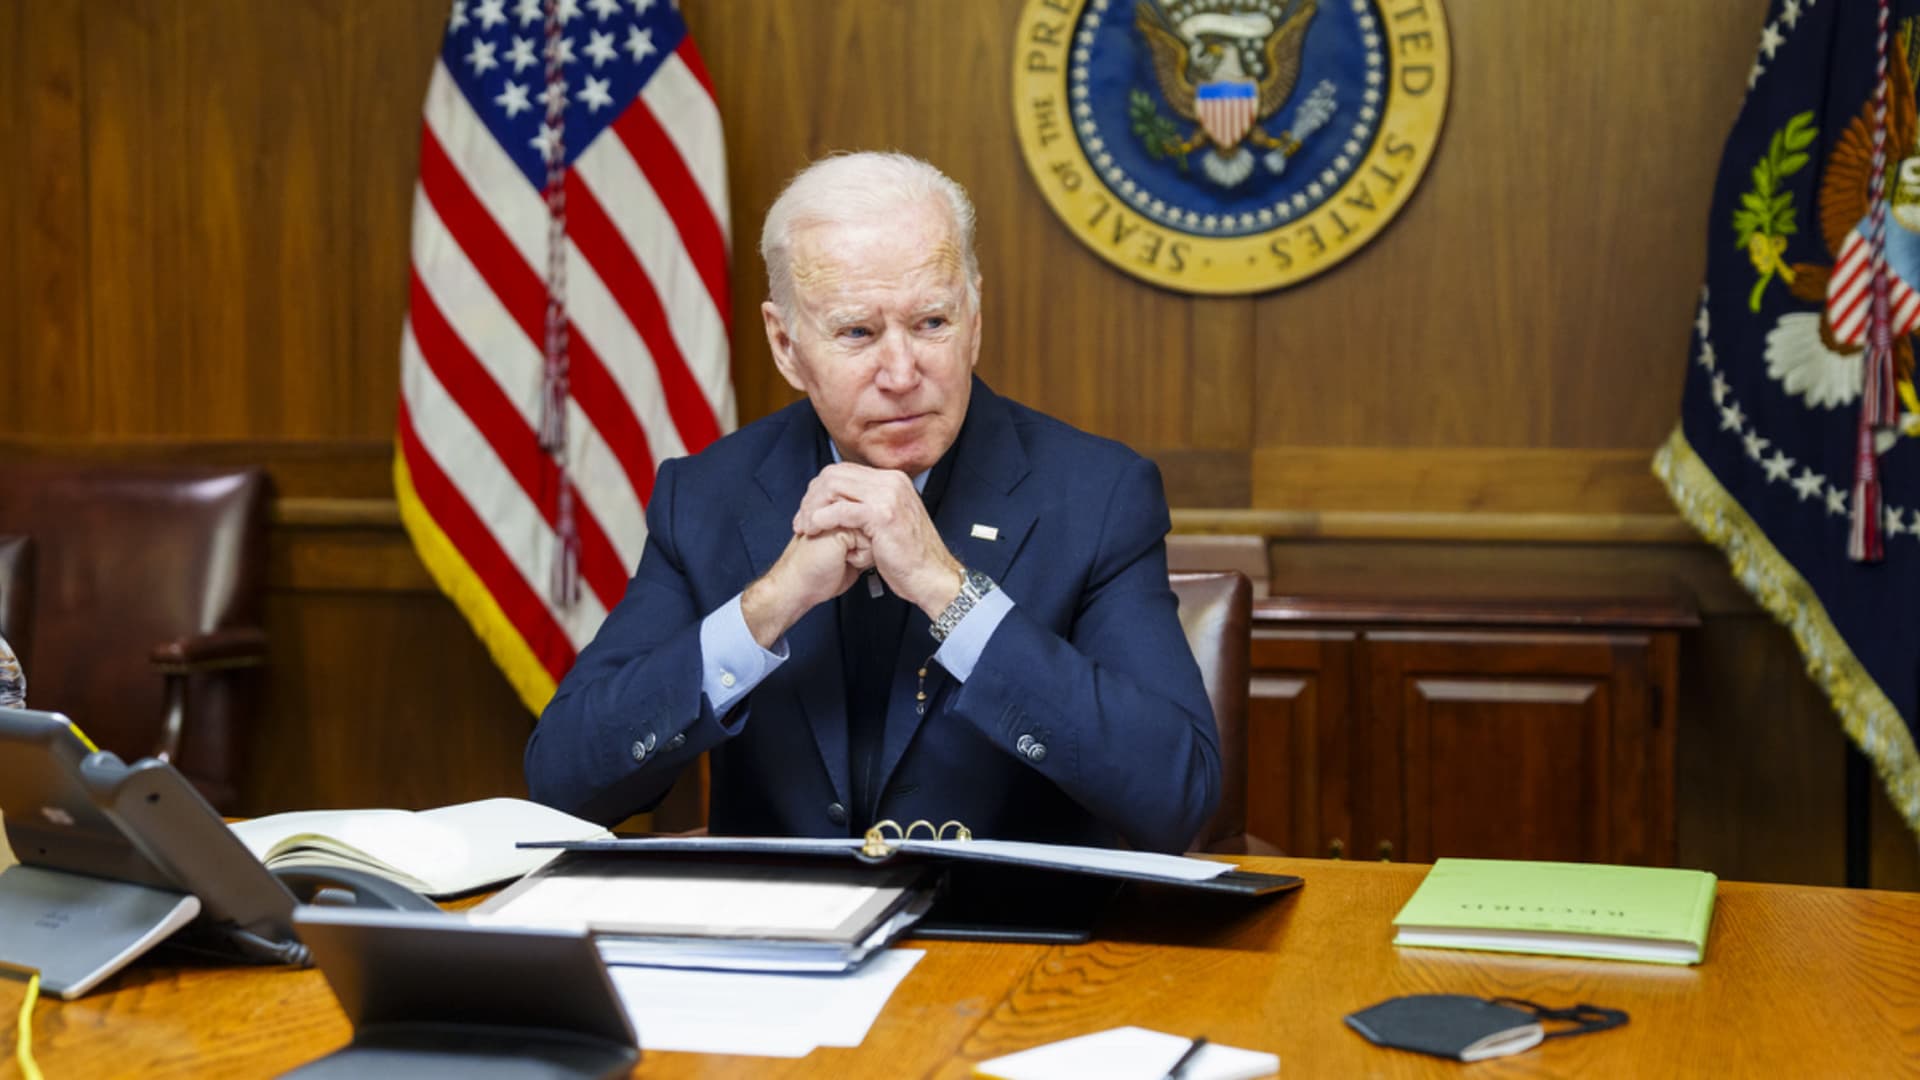 President Biden has warned Putin that the U.S. and its allies are willing to impose swift and severe costs on Russia.